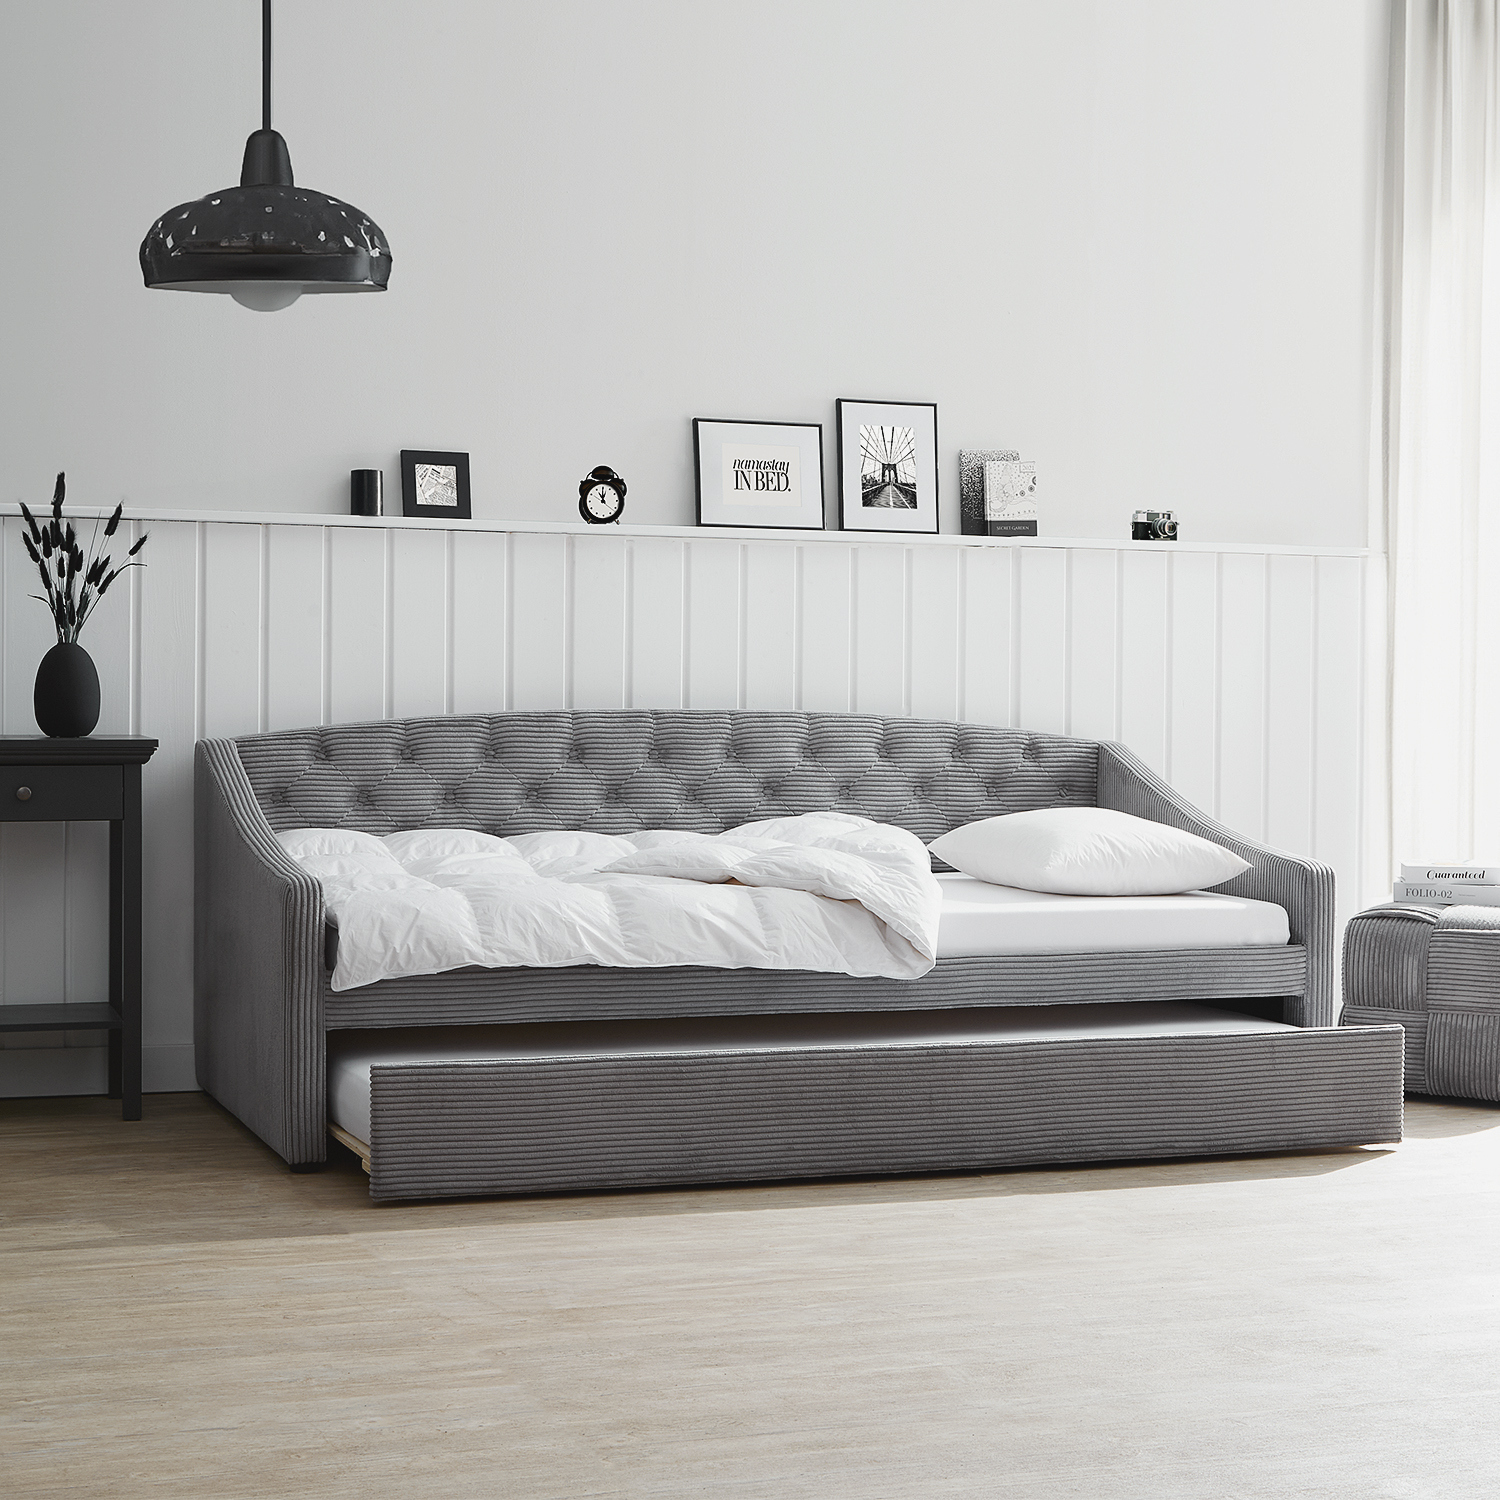 Sofa Bed 90x200 Day Bed Grey Cord Couch Small Sofa Single Bed Upholstered Bed Guest Bed Extendible